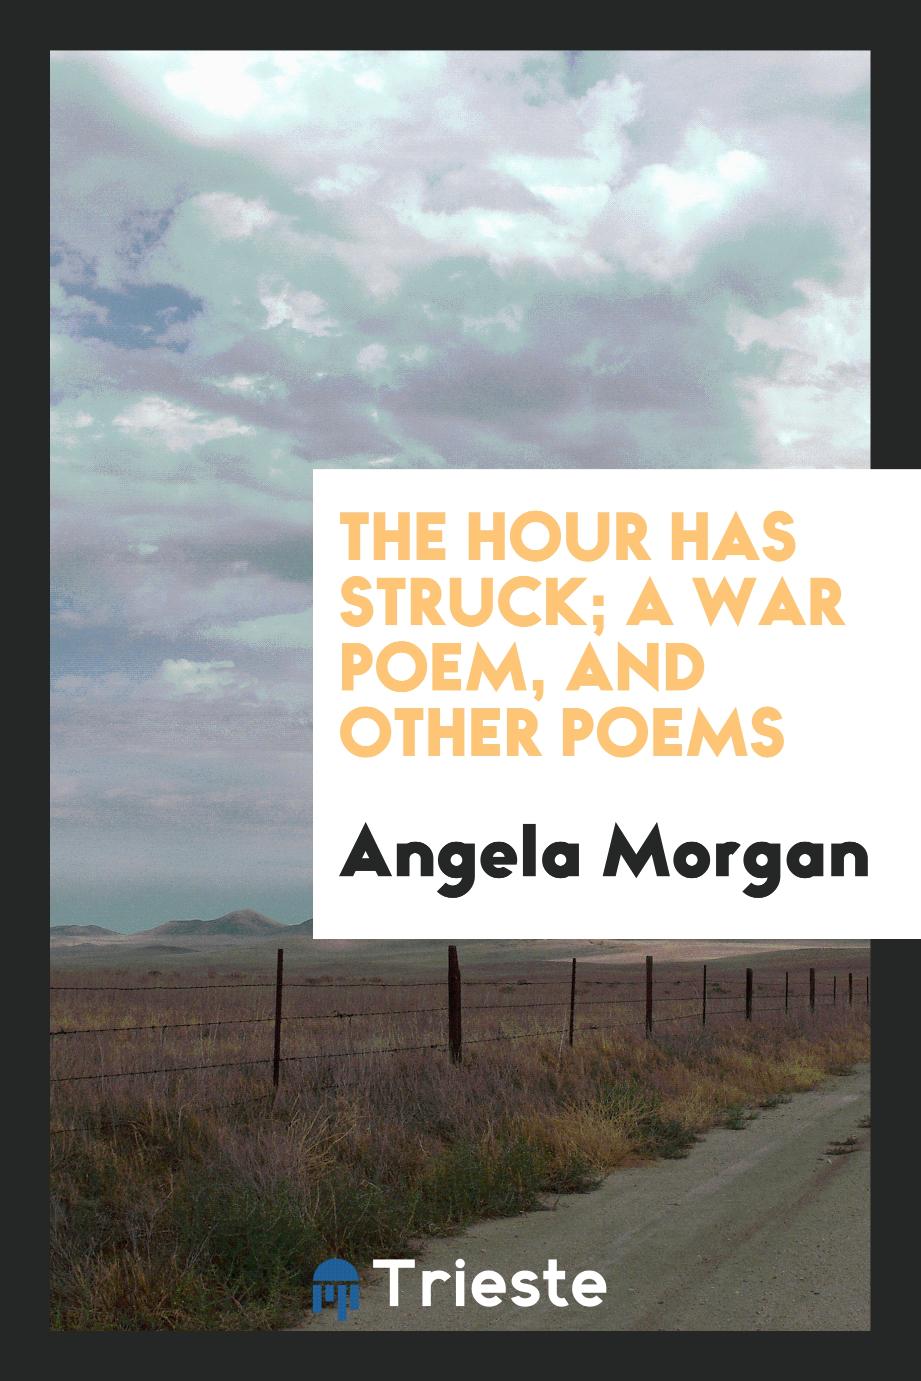 The hour has struck; a war poem, and other poems